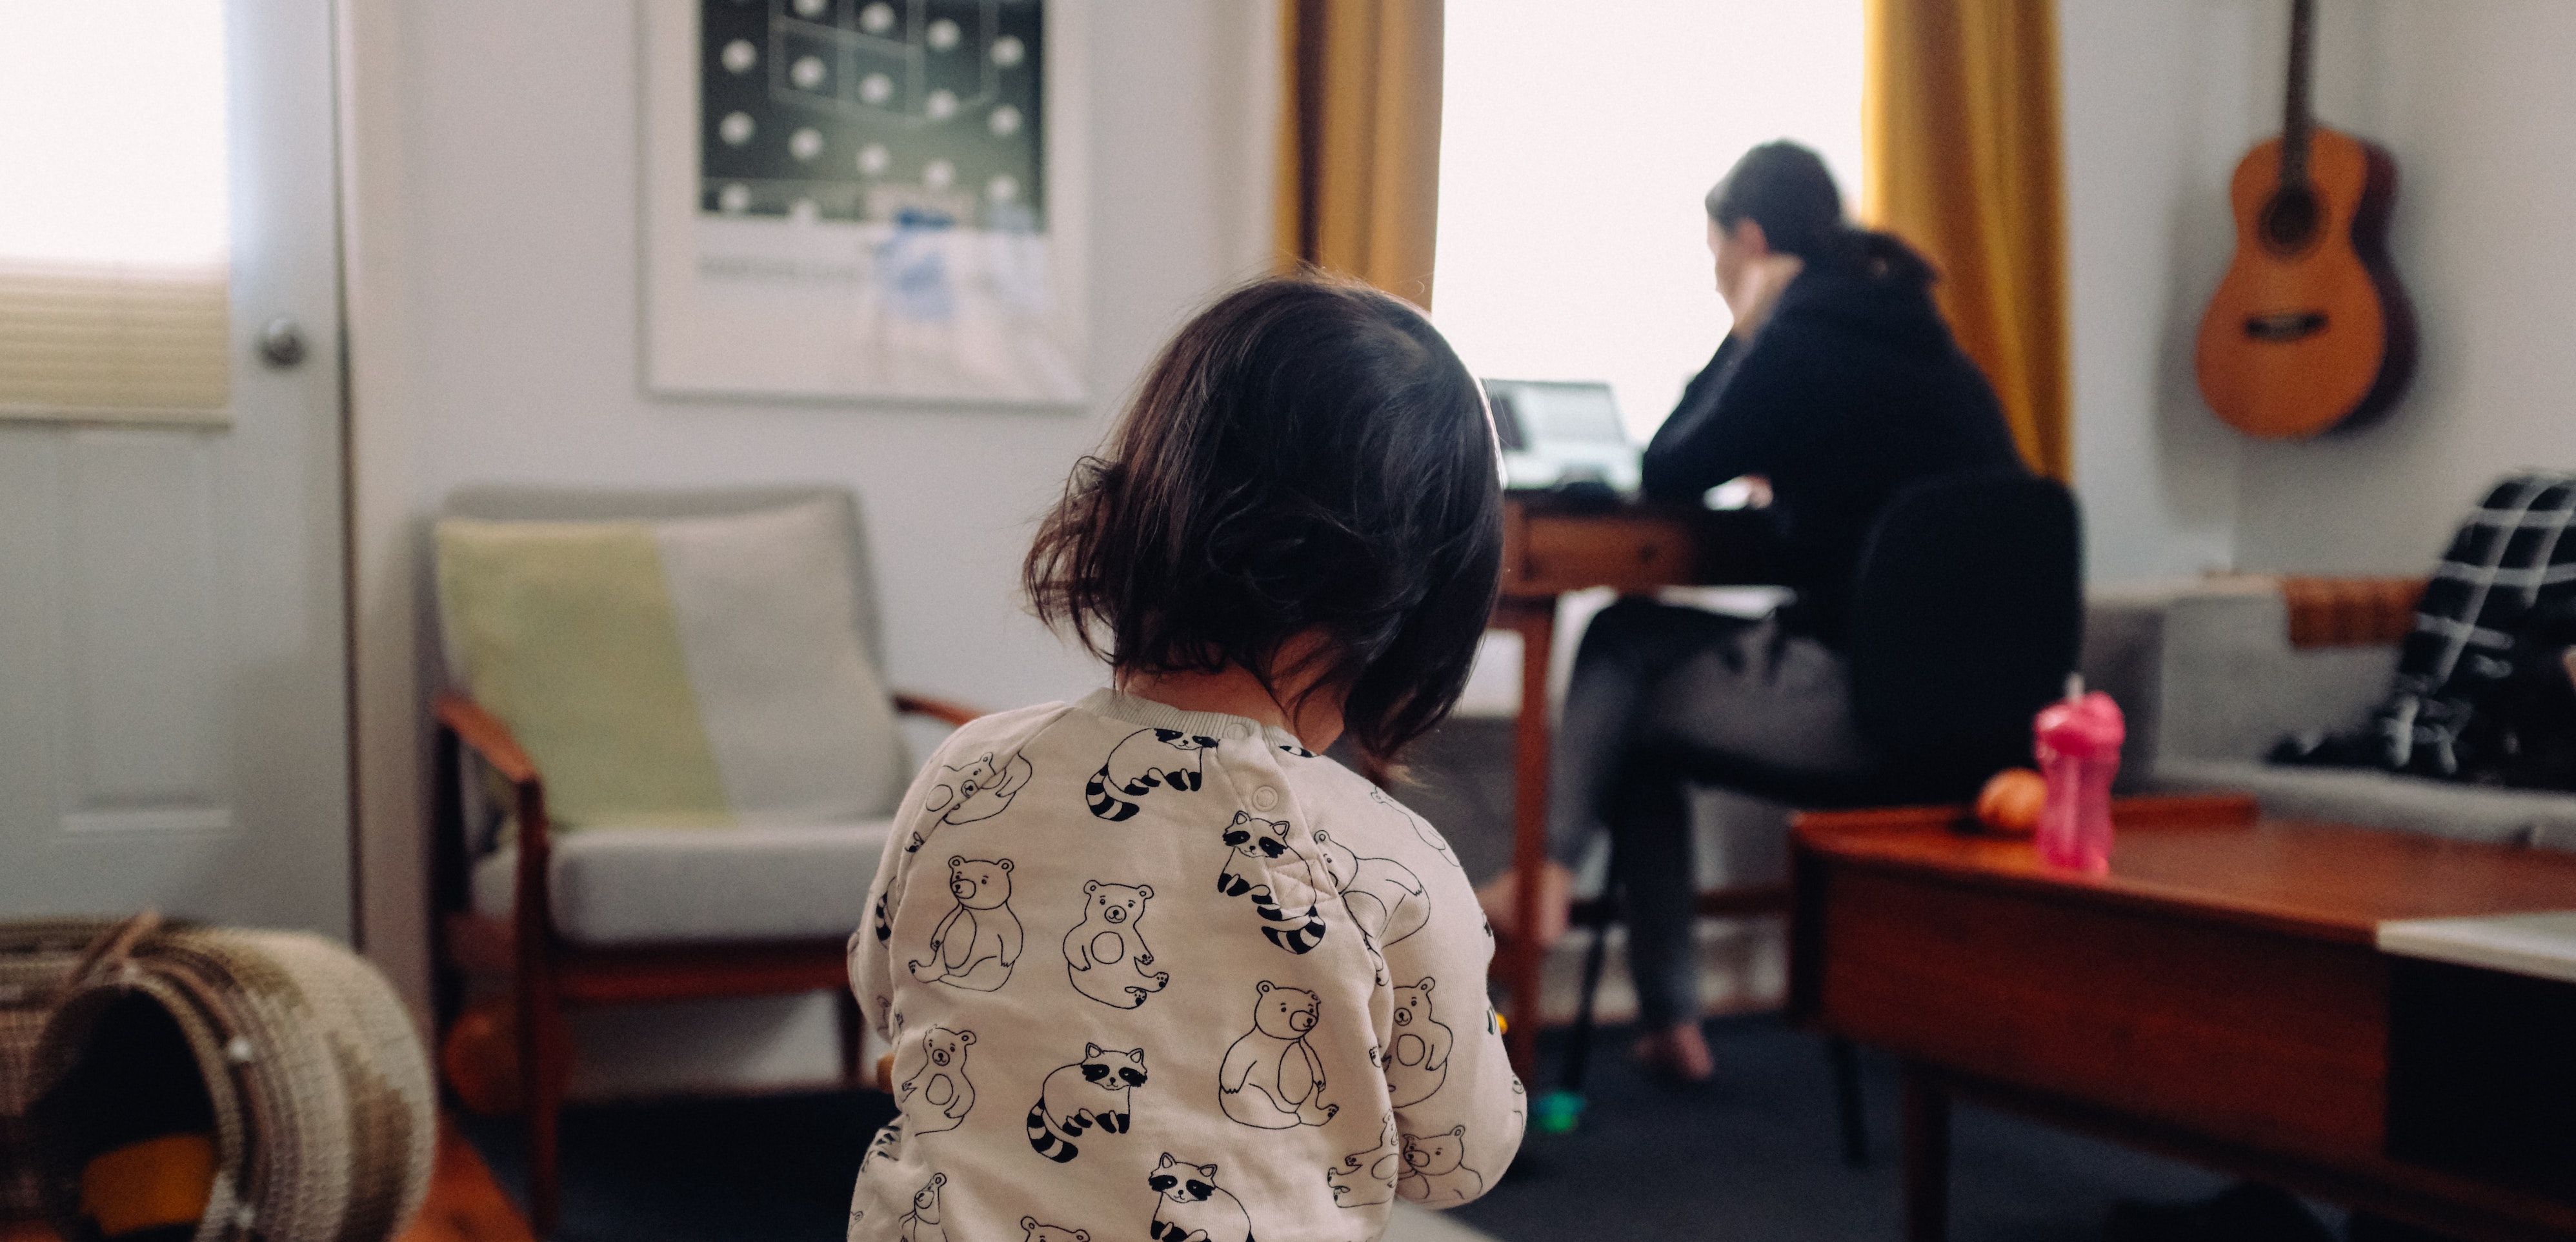 female guardian works on a laptop in the living room while a child wearing bear pajamas plays on the floor